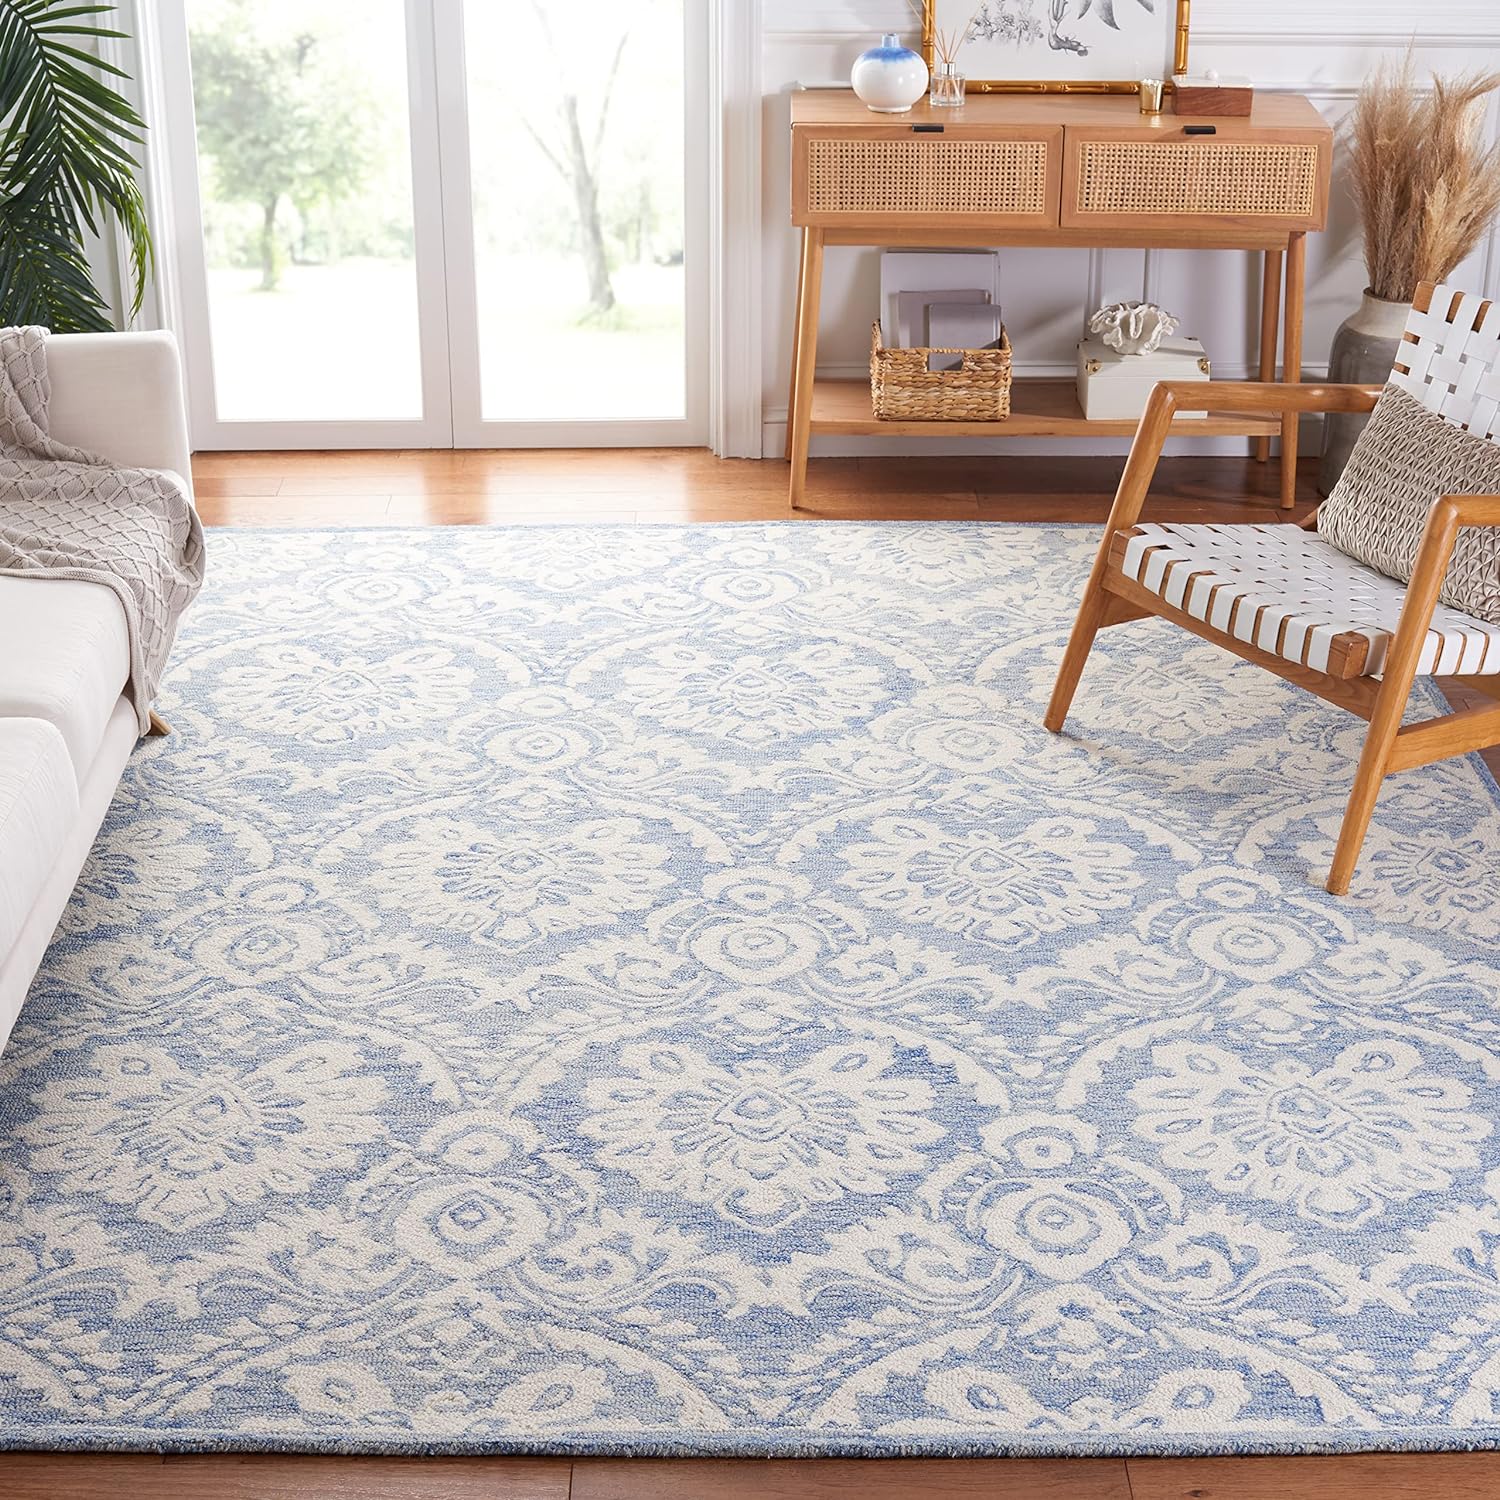 I love these rugs! I have them in several sizes throughout my home. Lovely blue and white pattern, sturdy wool.